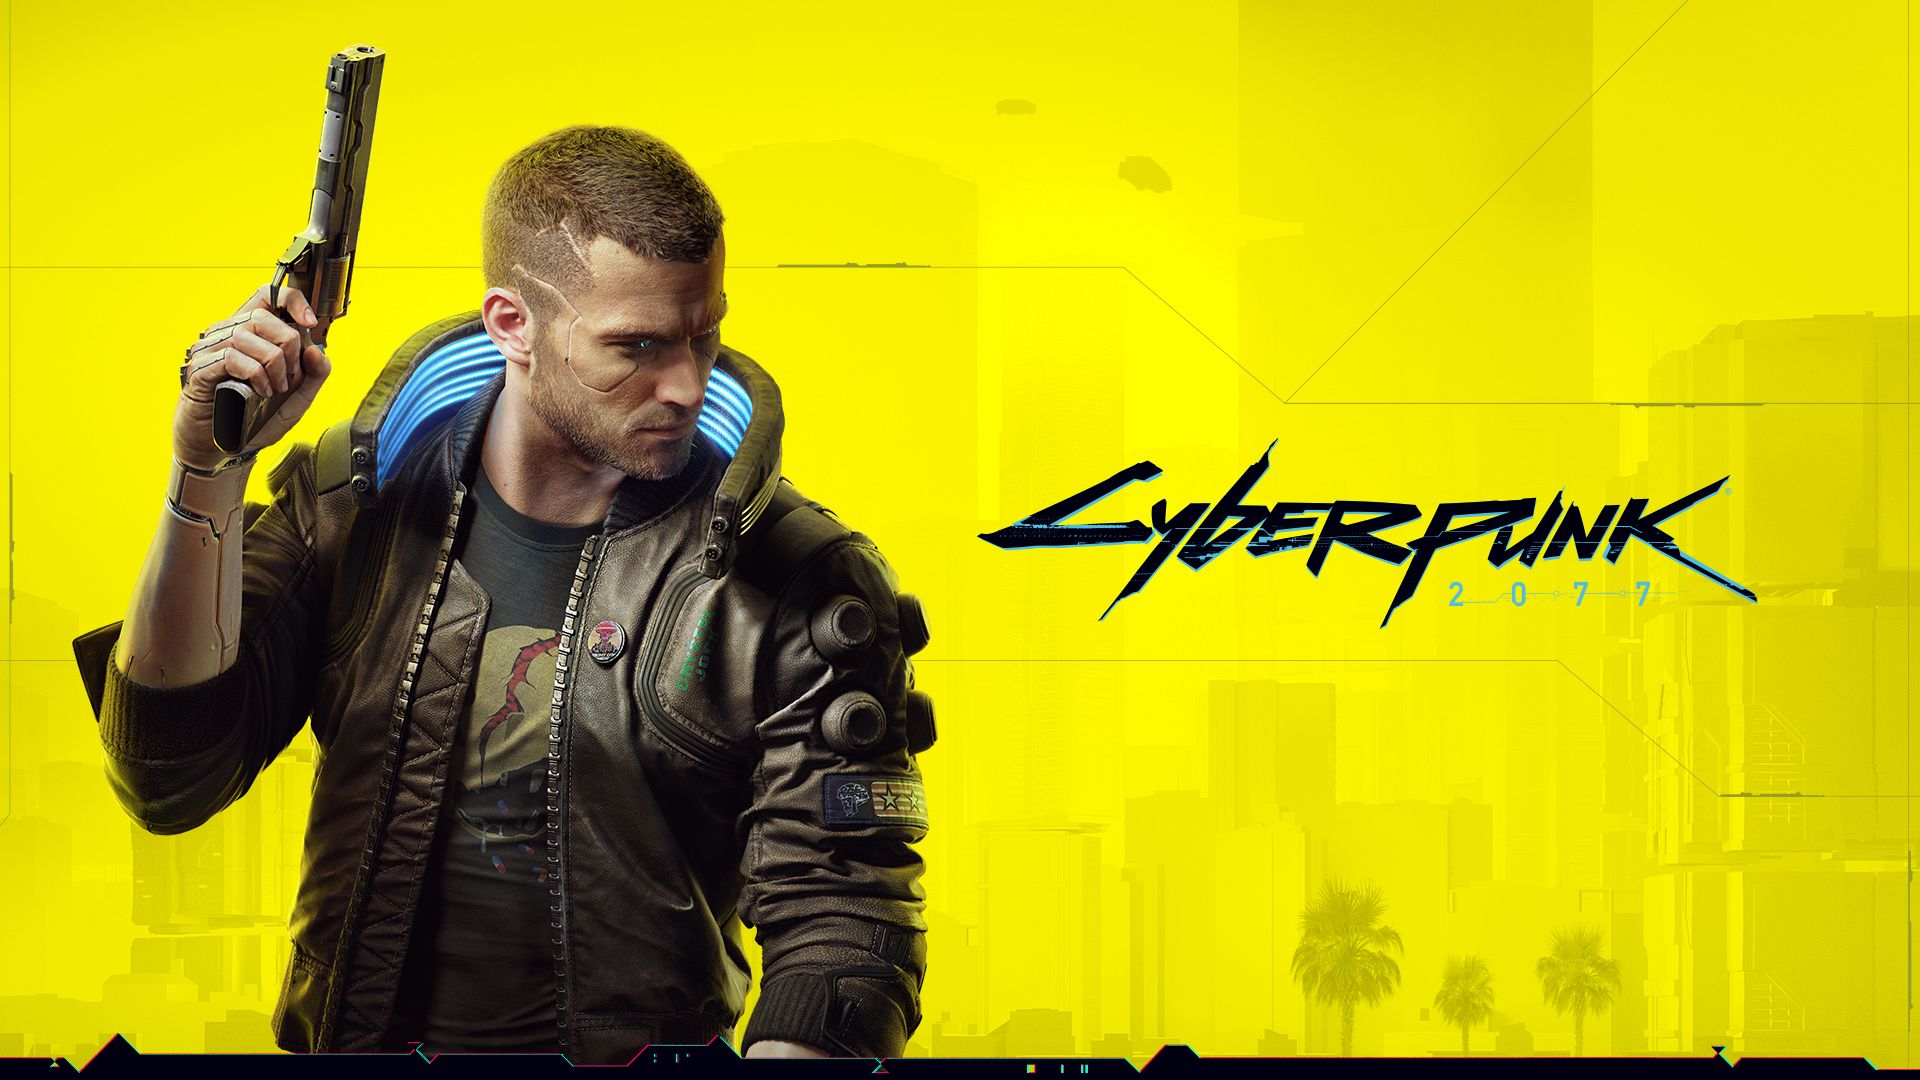 Cyberpunk 2077 price guide: with the game out in the wild getting the right price is paramount